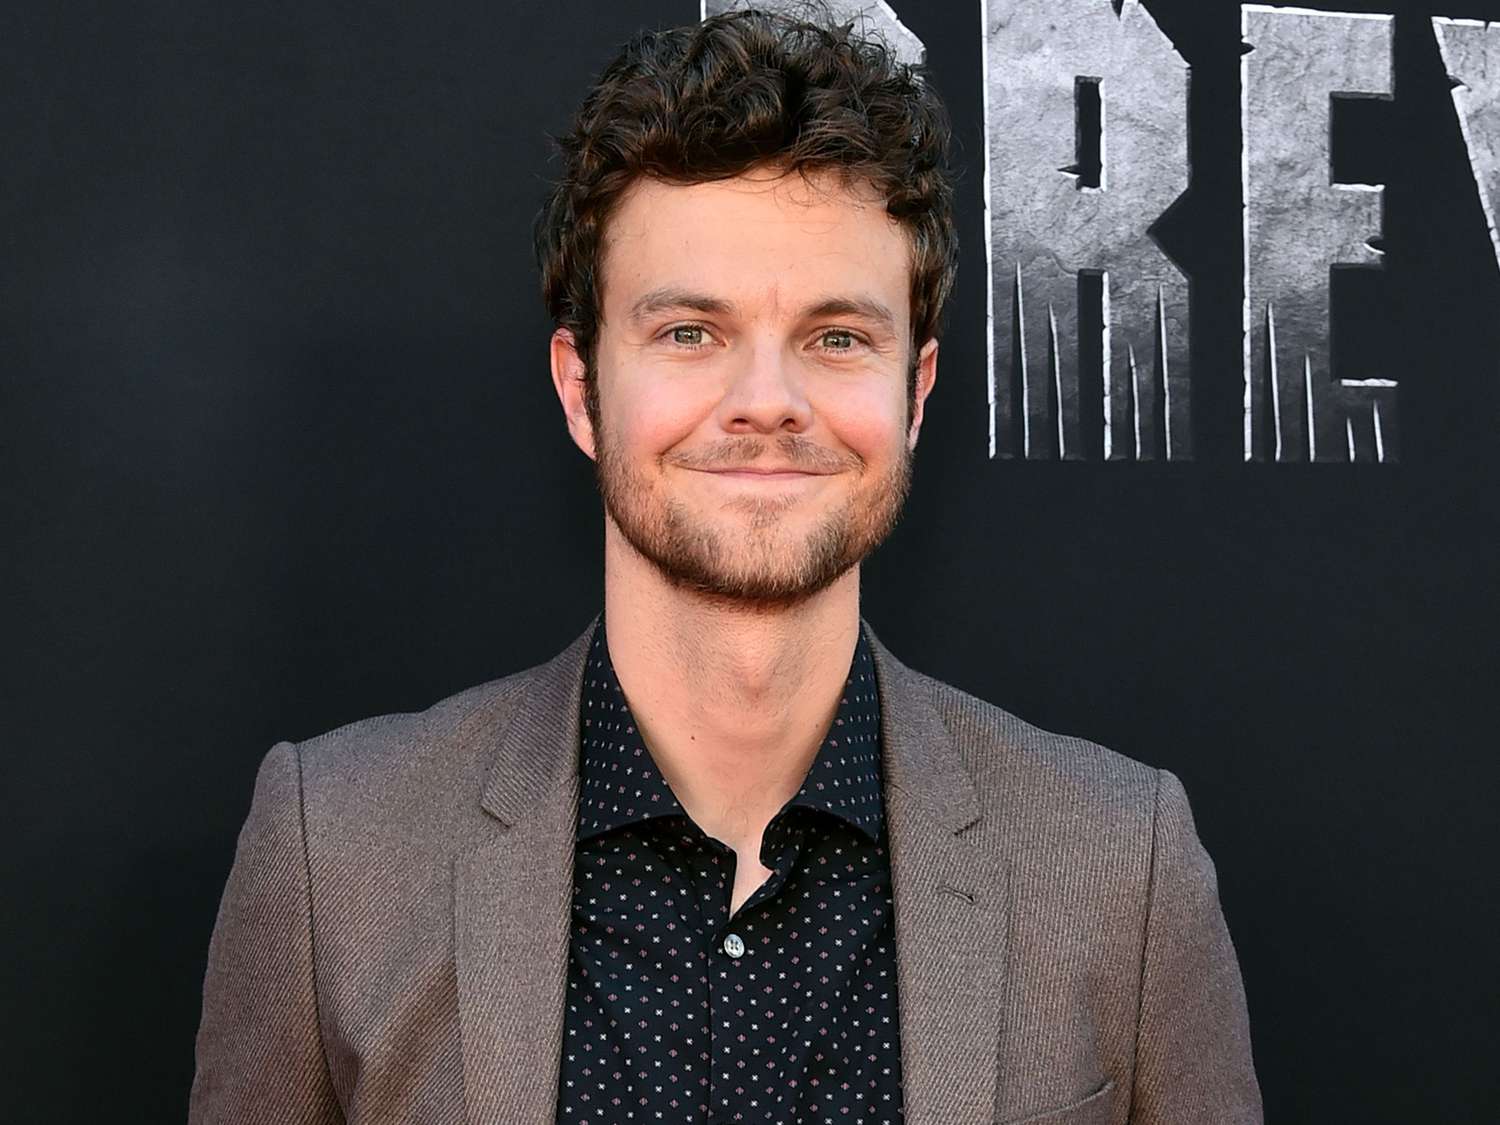 Jack Quaid attends the Prey Premiere at Regency Village Theatre in Los Angeles, California on August 2, 2022